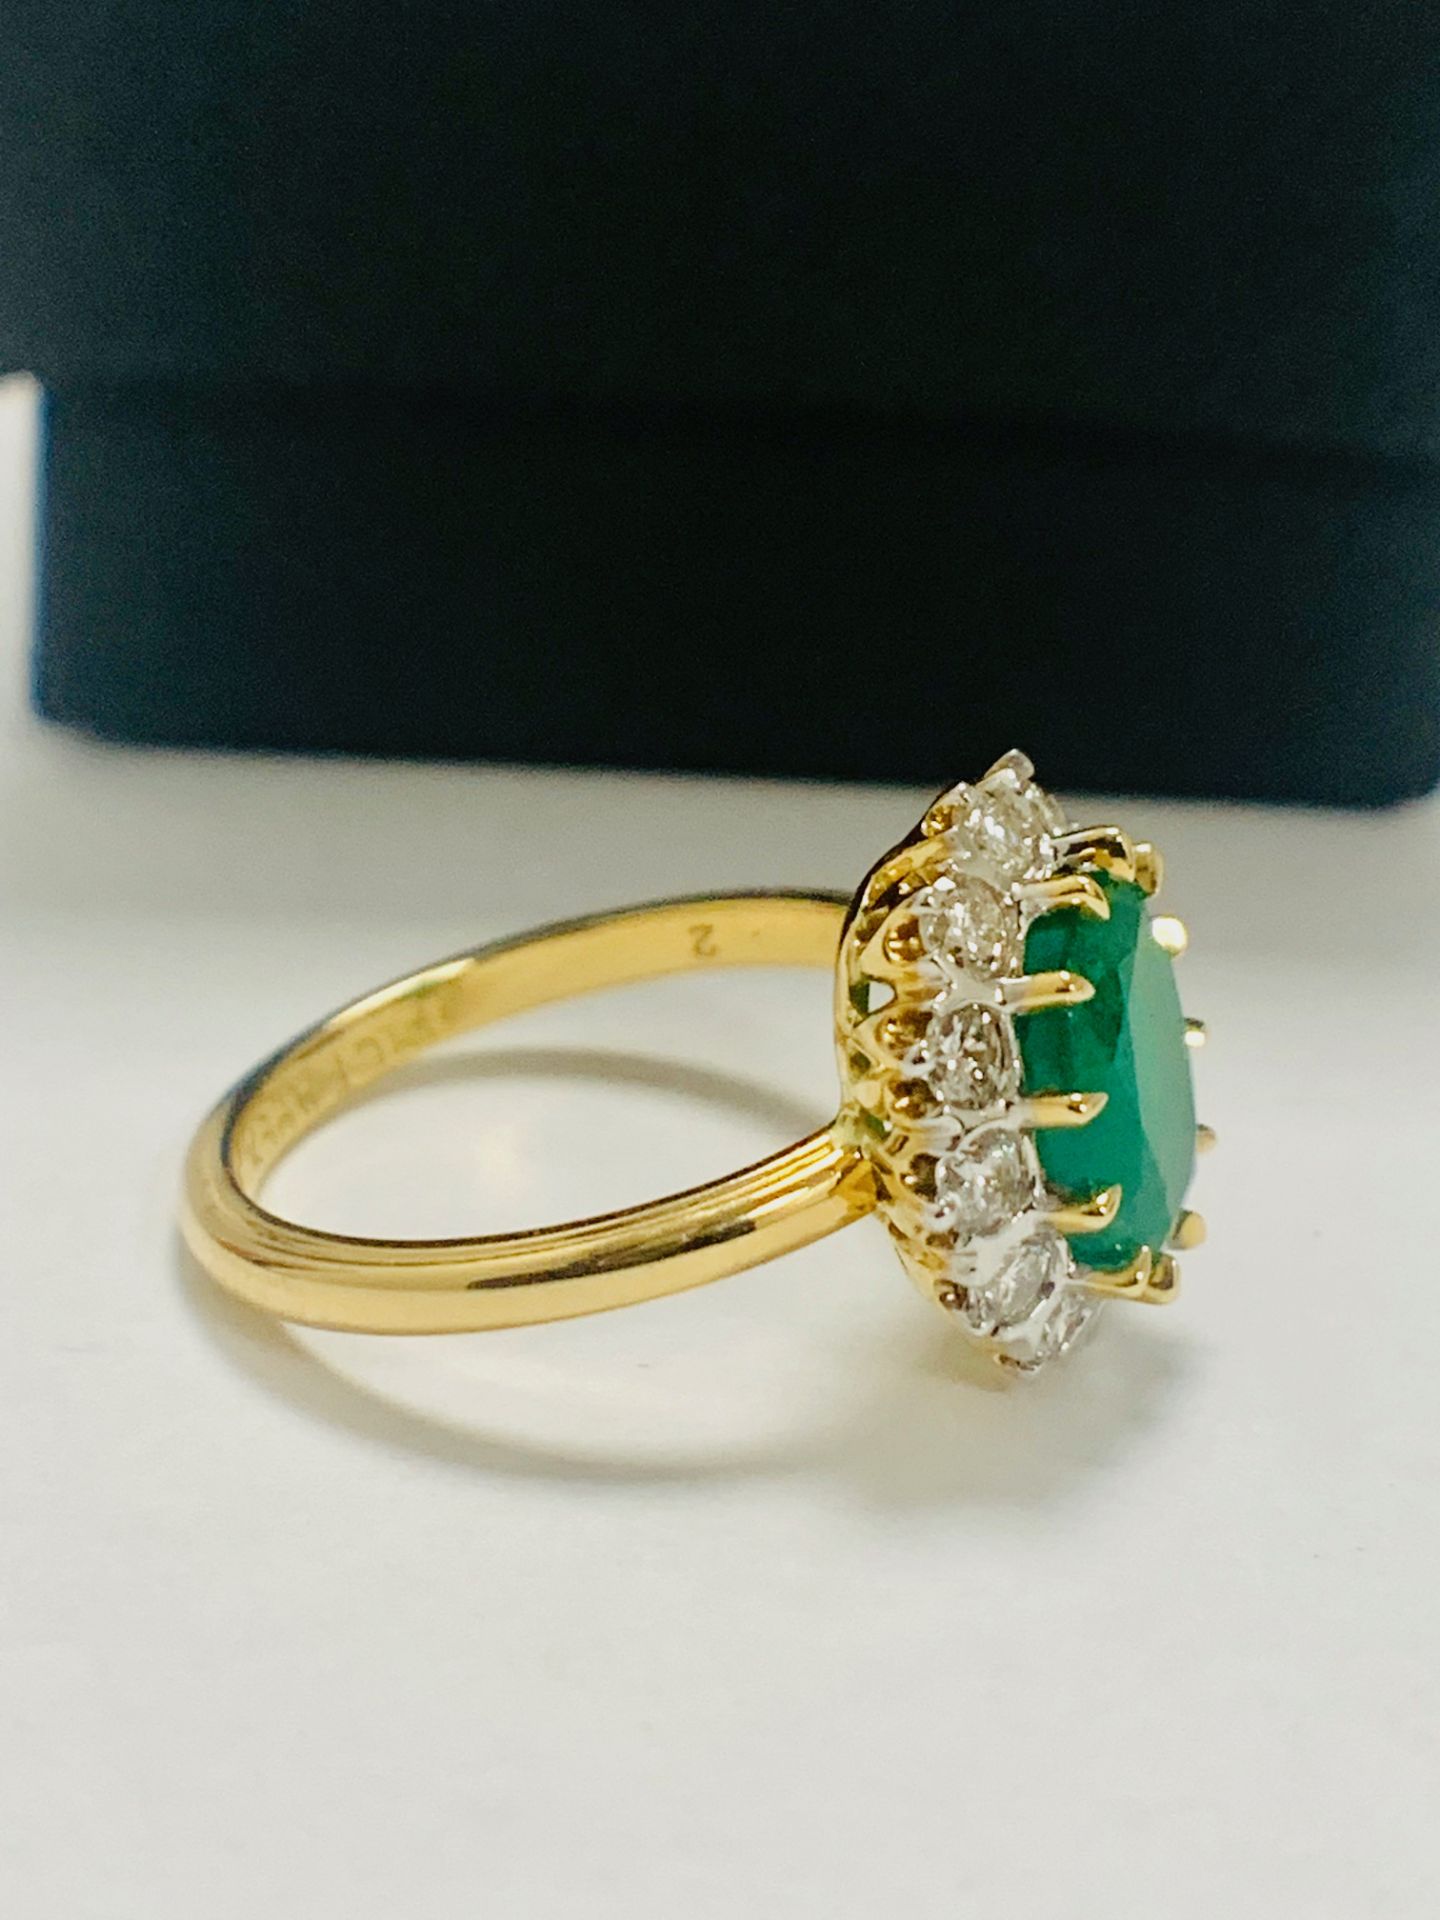 14ct Yellow Gold Emerald and Diamond Ring Featuring Centre, Oval Cut, Dark Green Emerald - Image 7 of 12